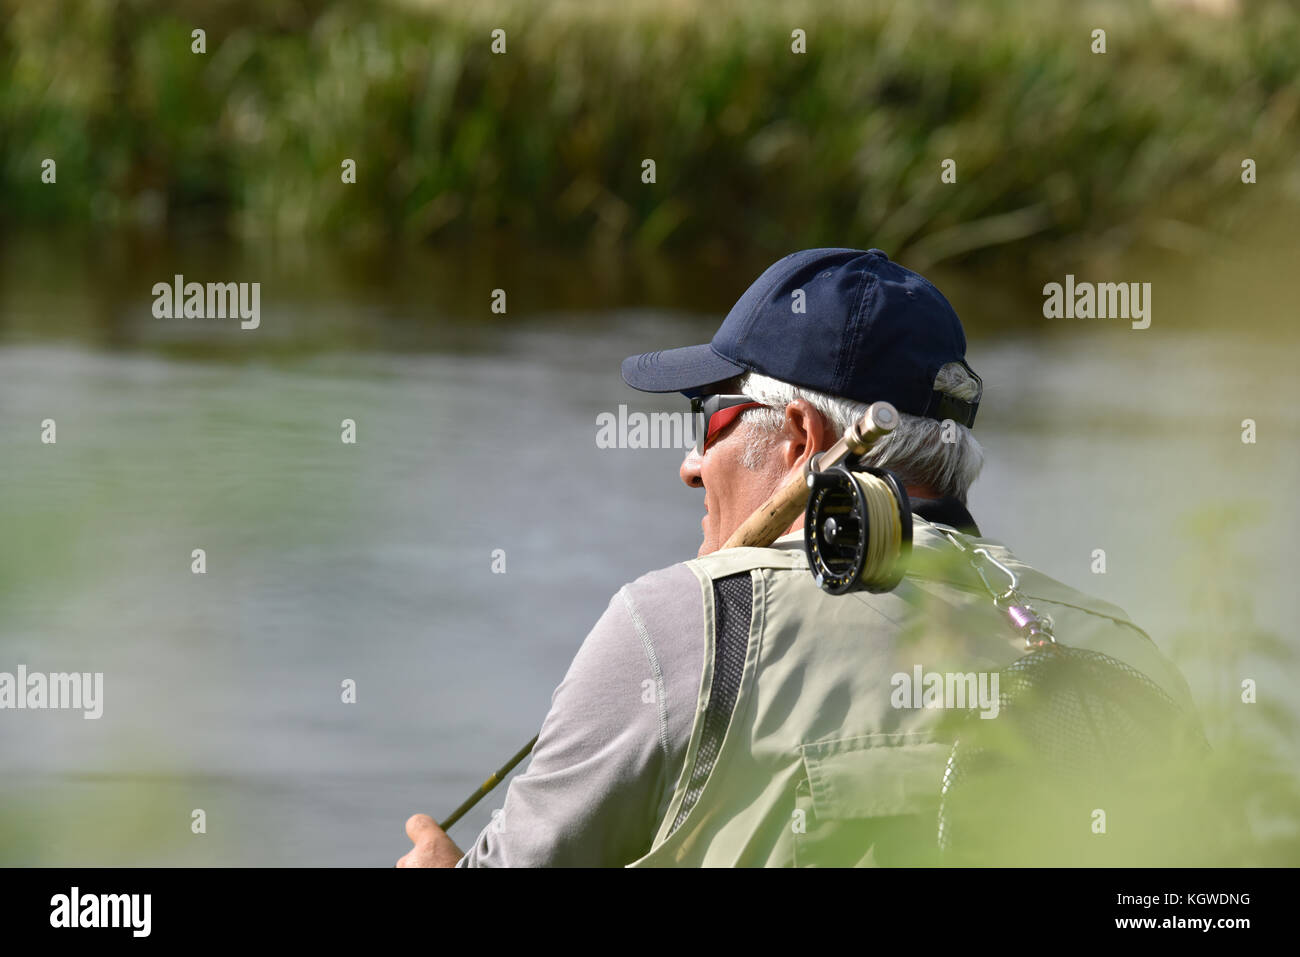 Fly-fisherman Waiting With Fishing Pole On Shoulder Stock Photo